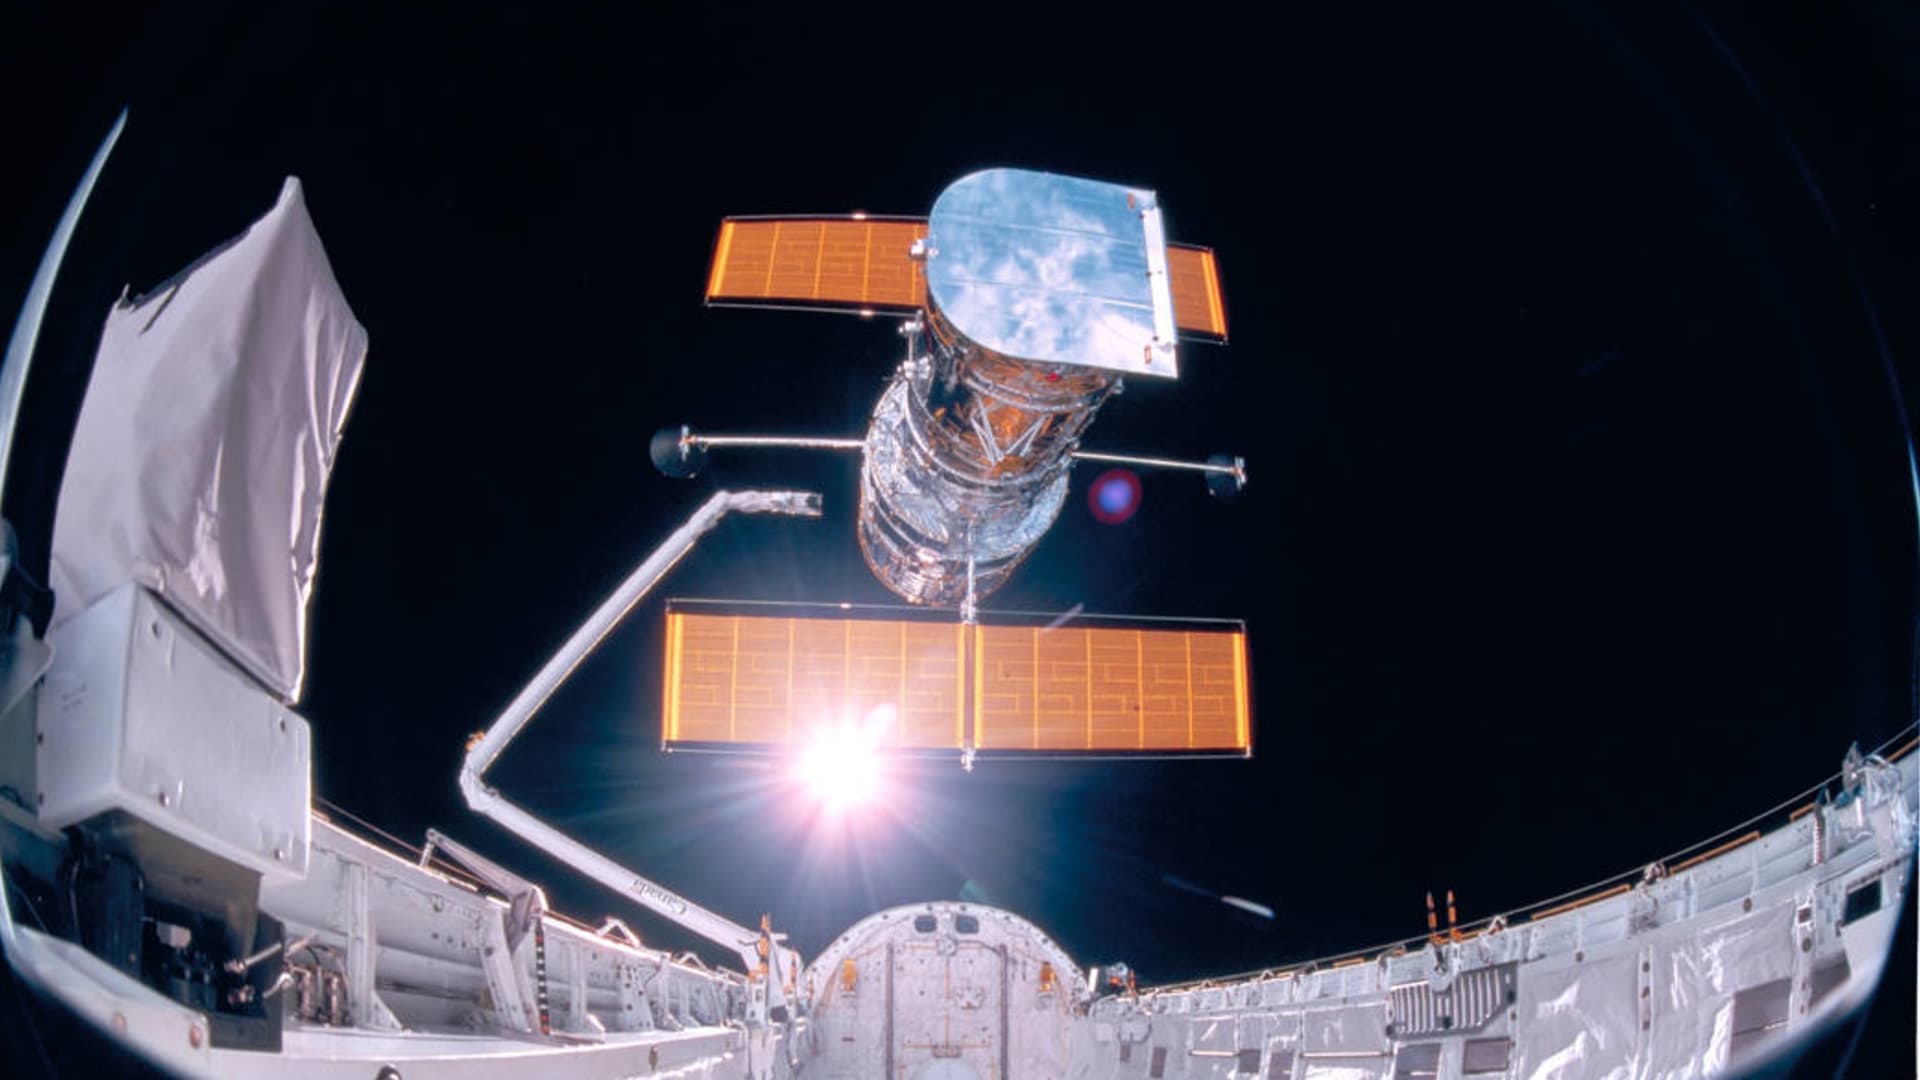 NASA is working with SpaceX to explore a private mission to extend the life of the Hubble telescope